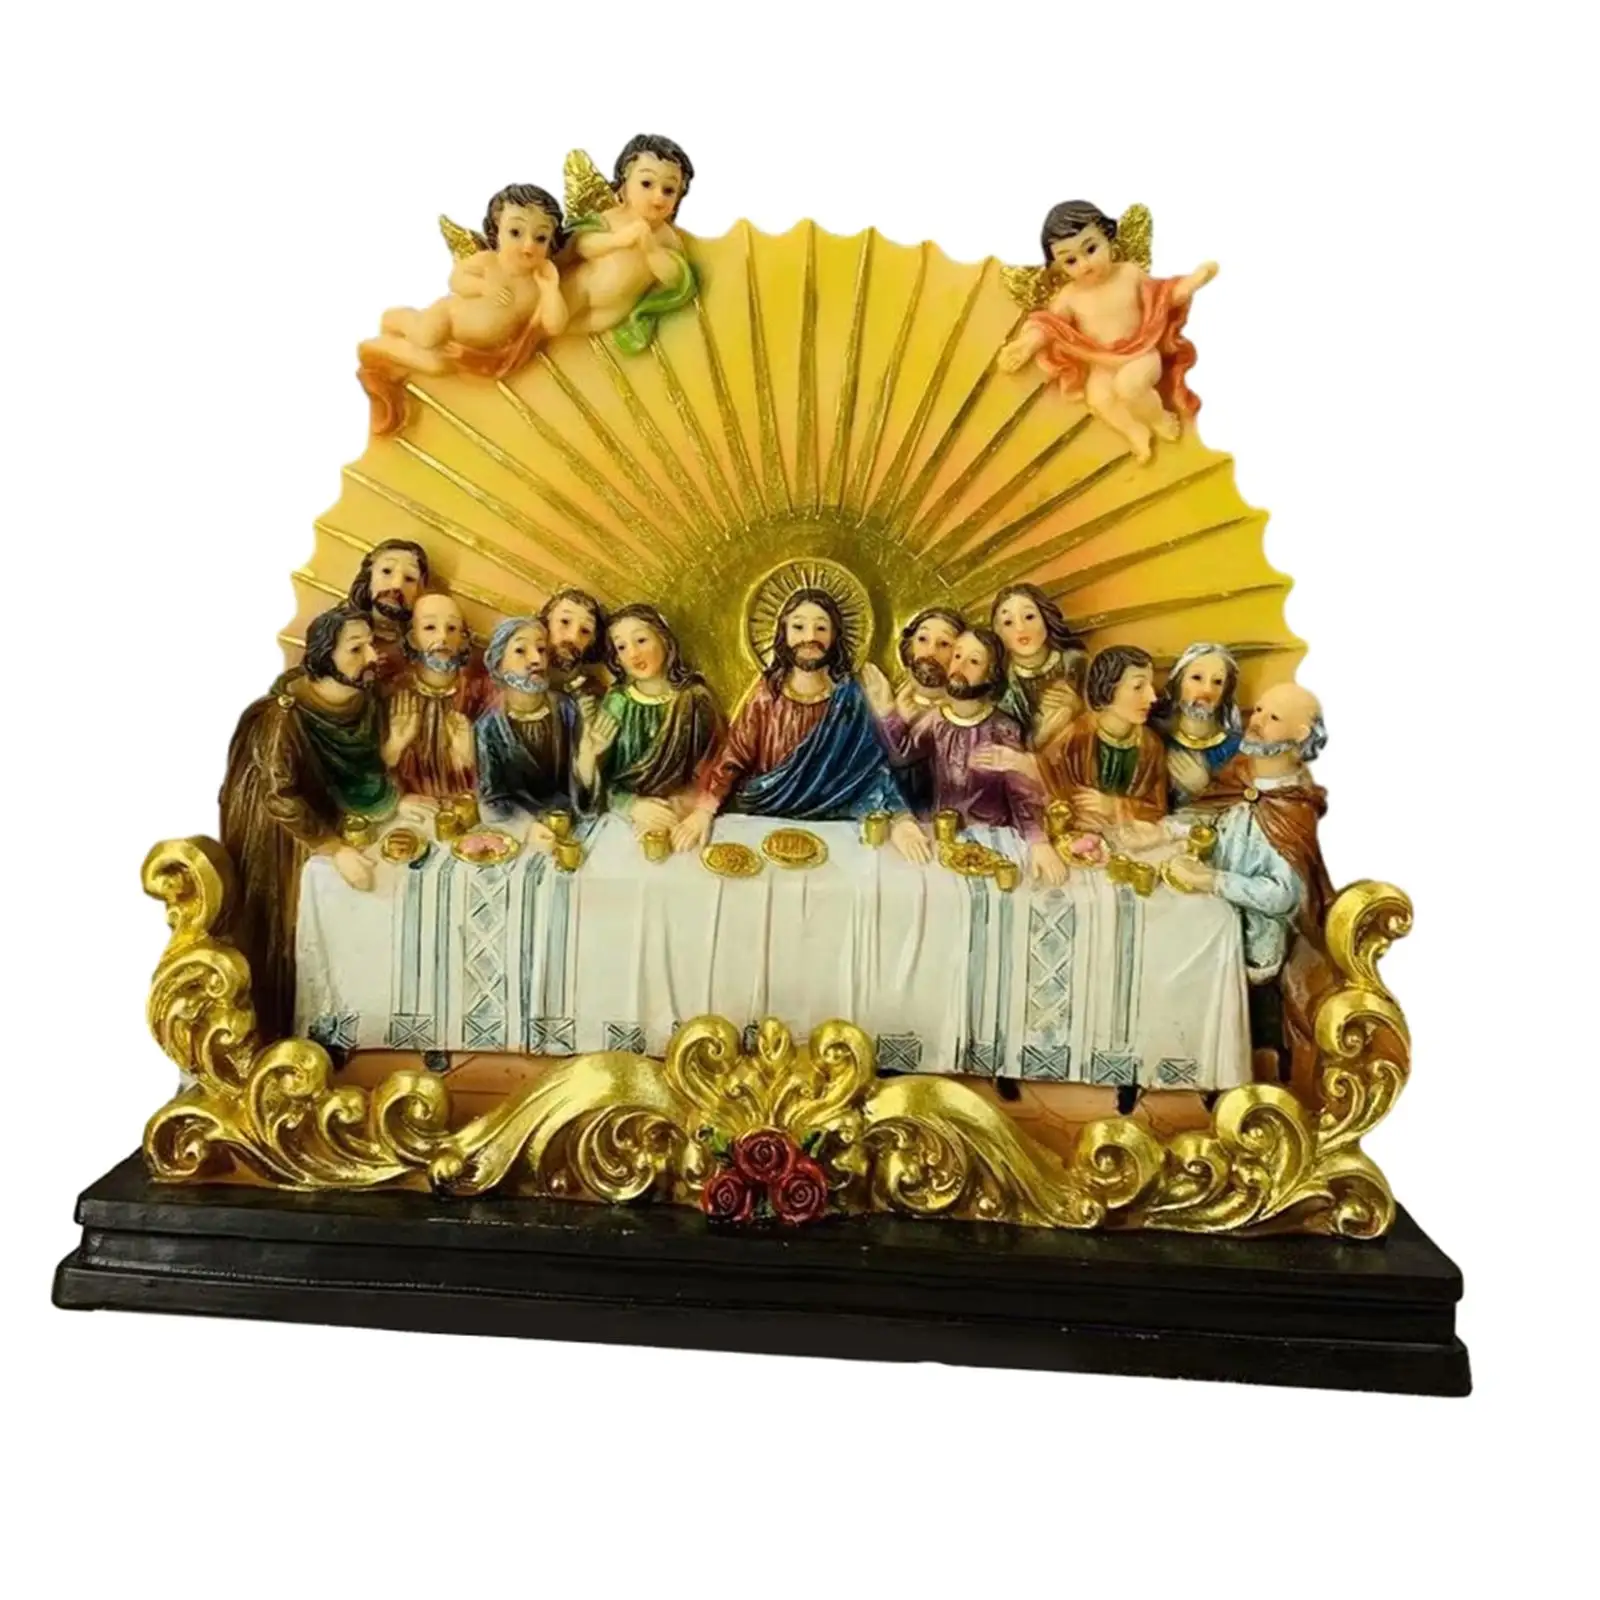 Resin Last Supper Statue Sculpture Decorative Crafts Tabletop Figurine for Office Home Living Room Ornaments Collection Gifts